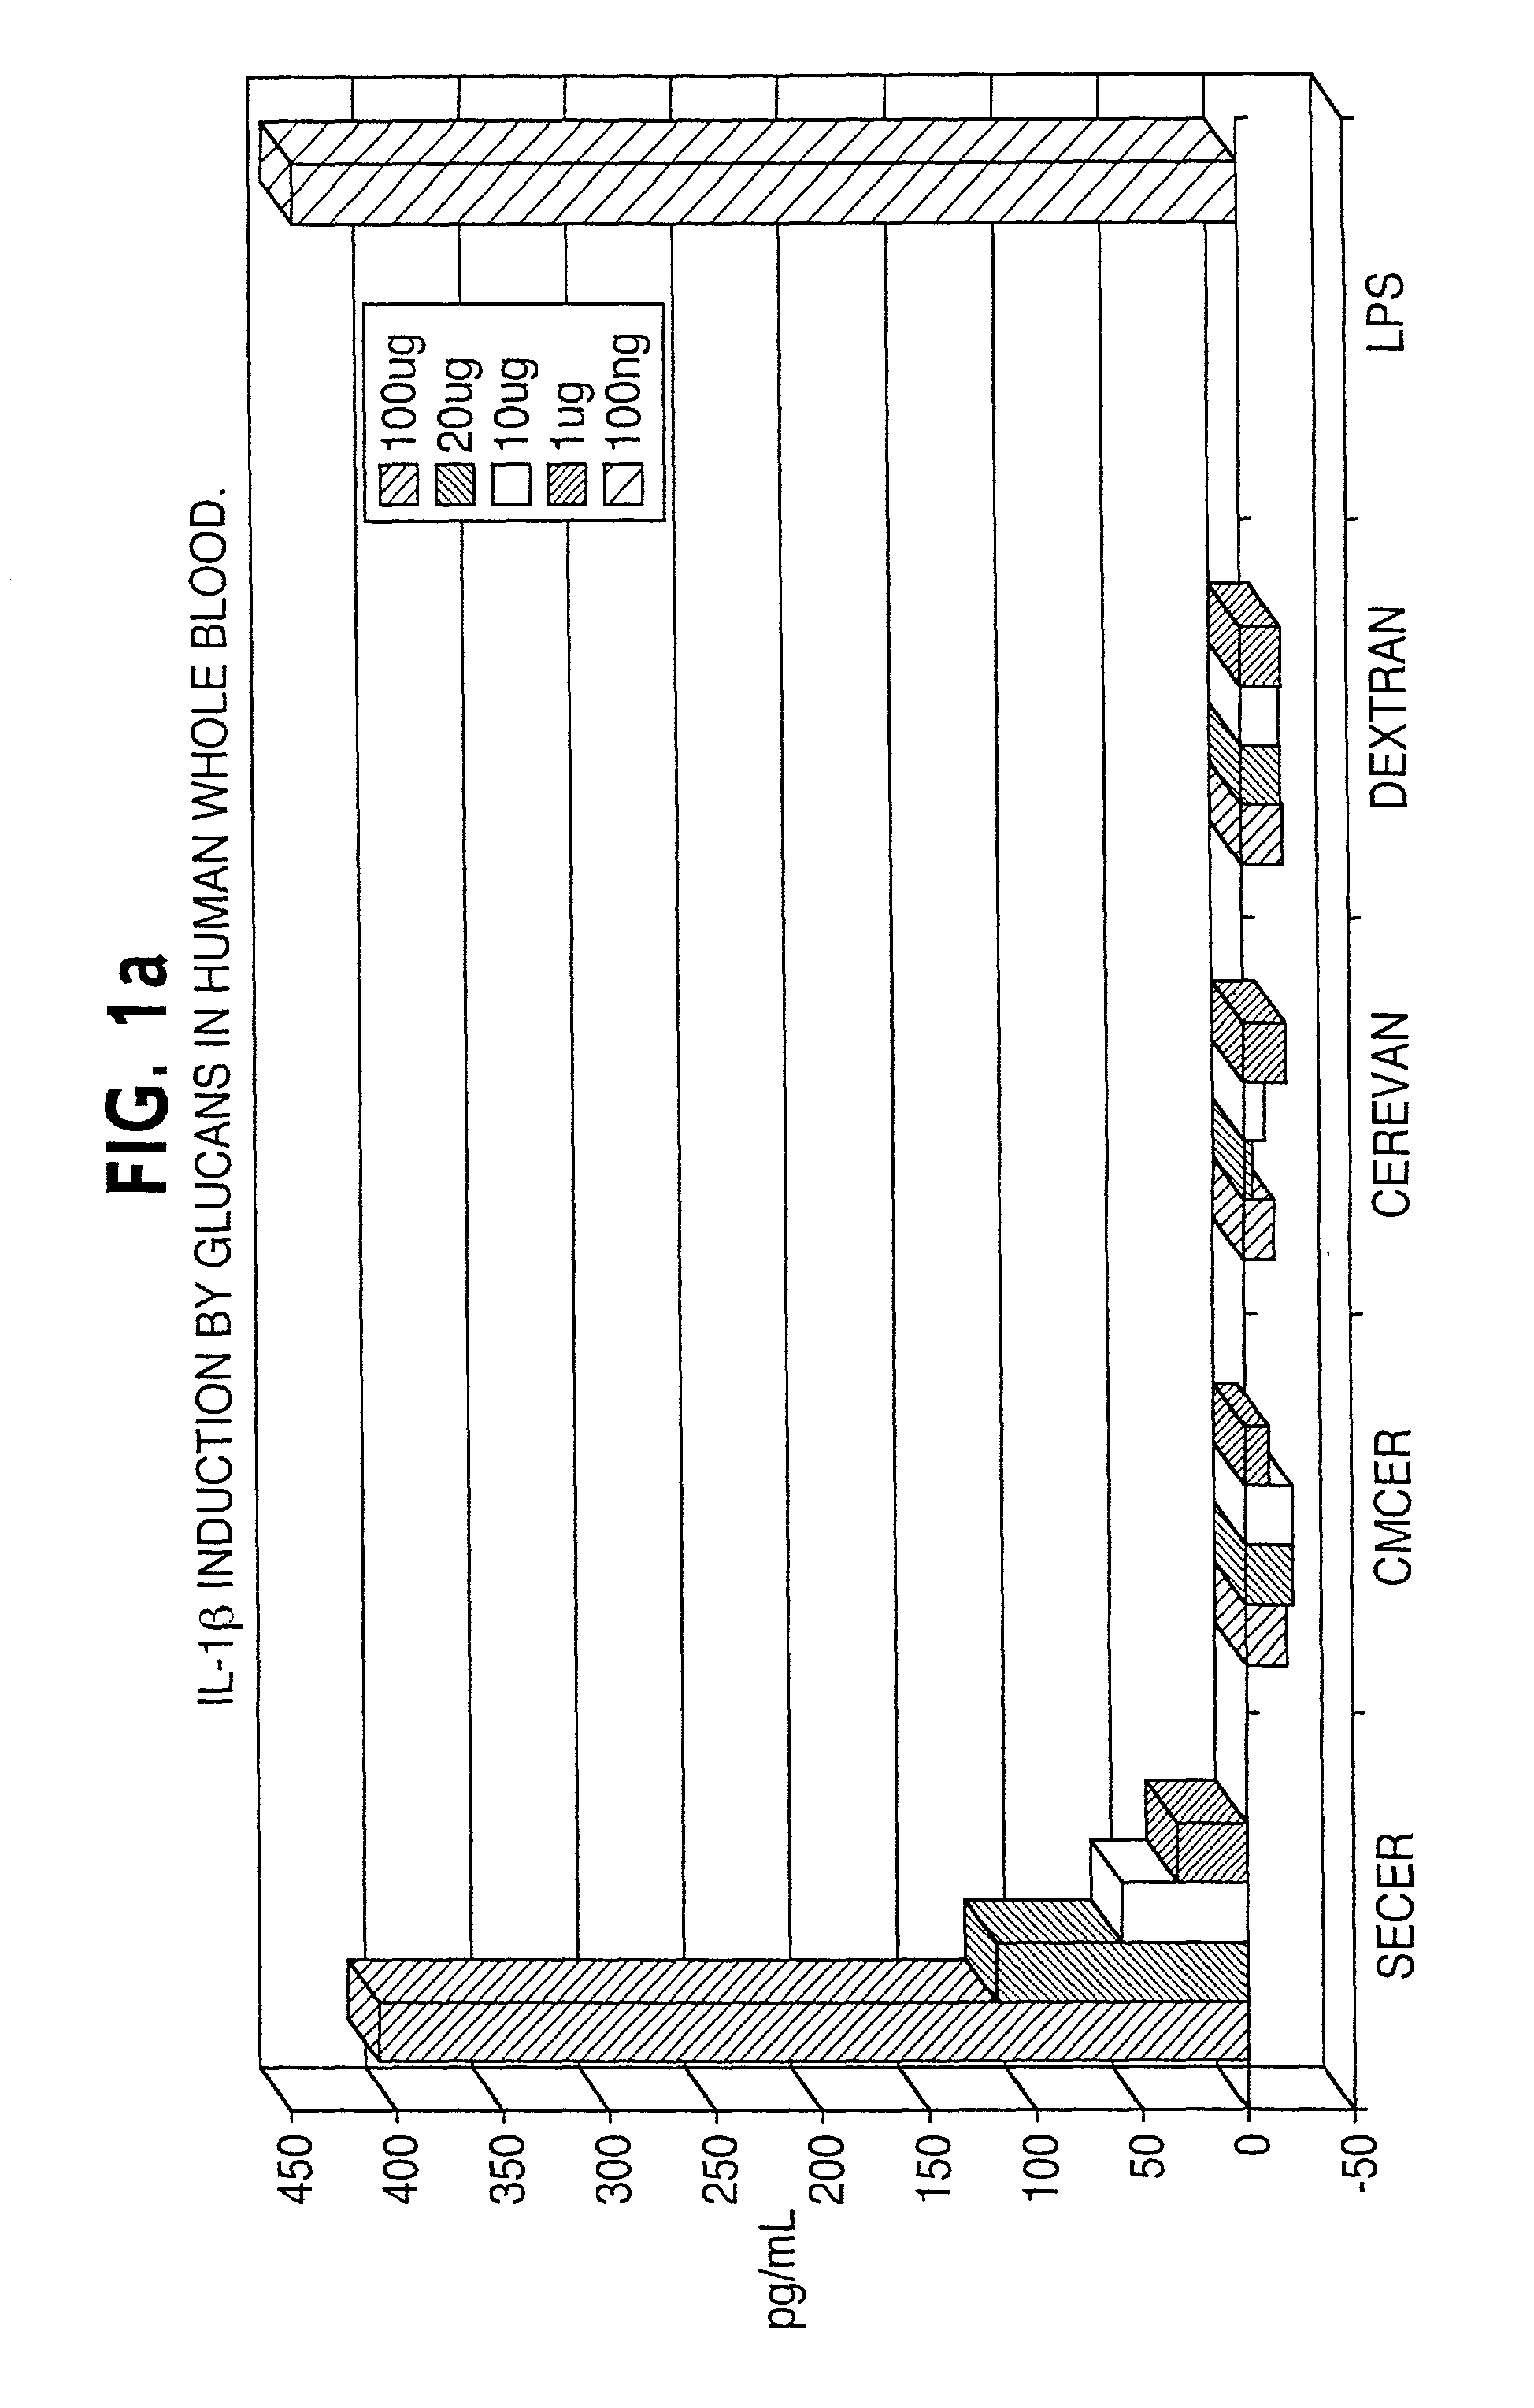 Compositions of beta-glucans and specific antibodies